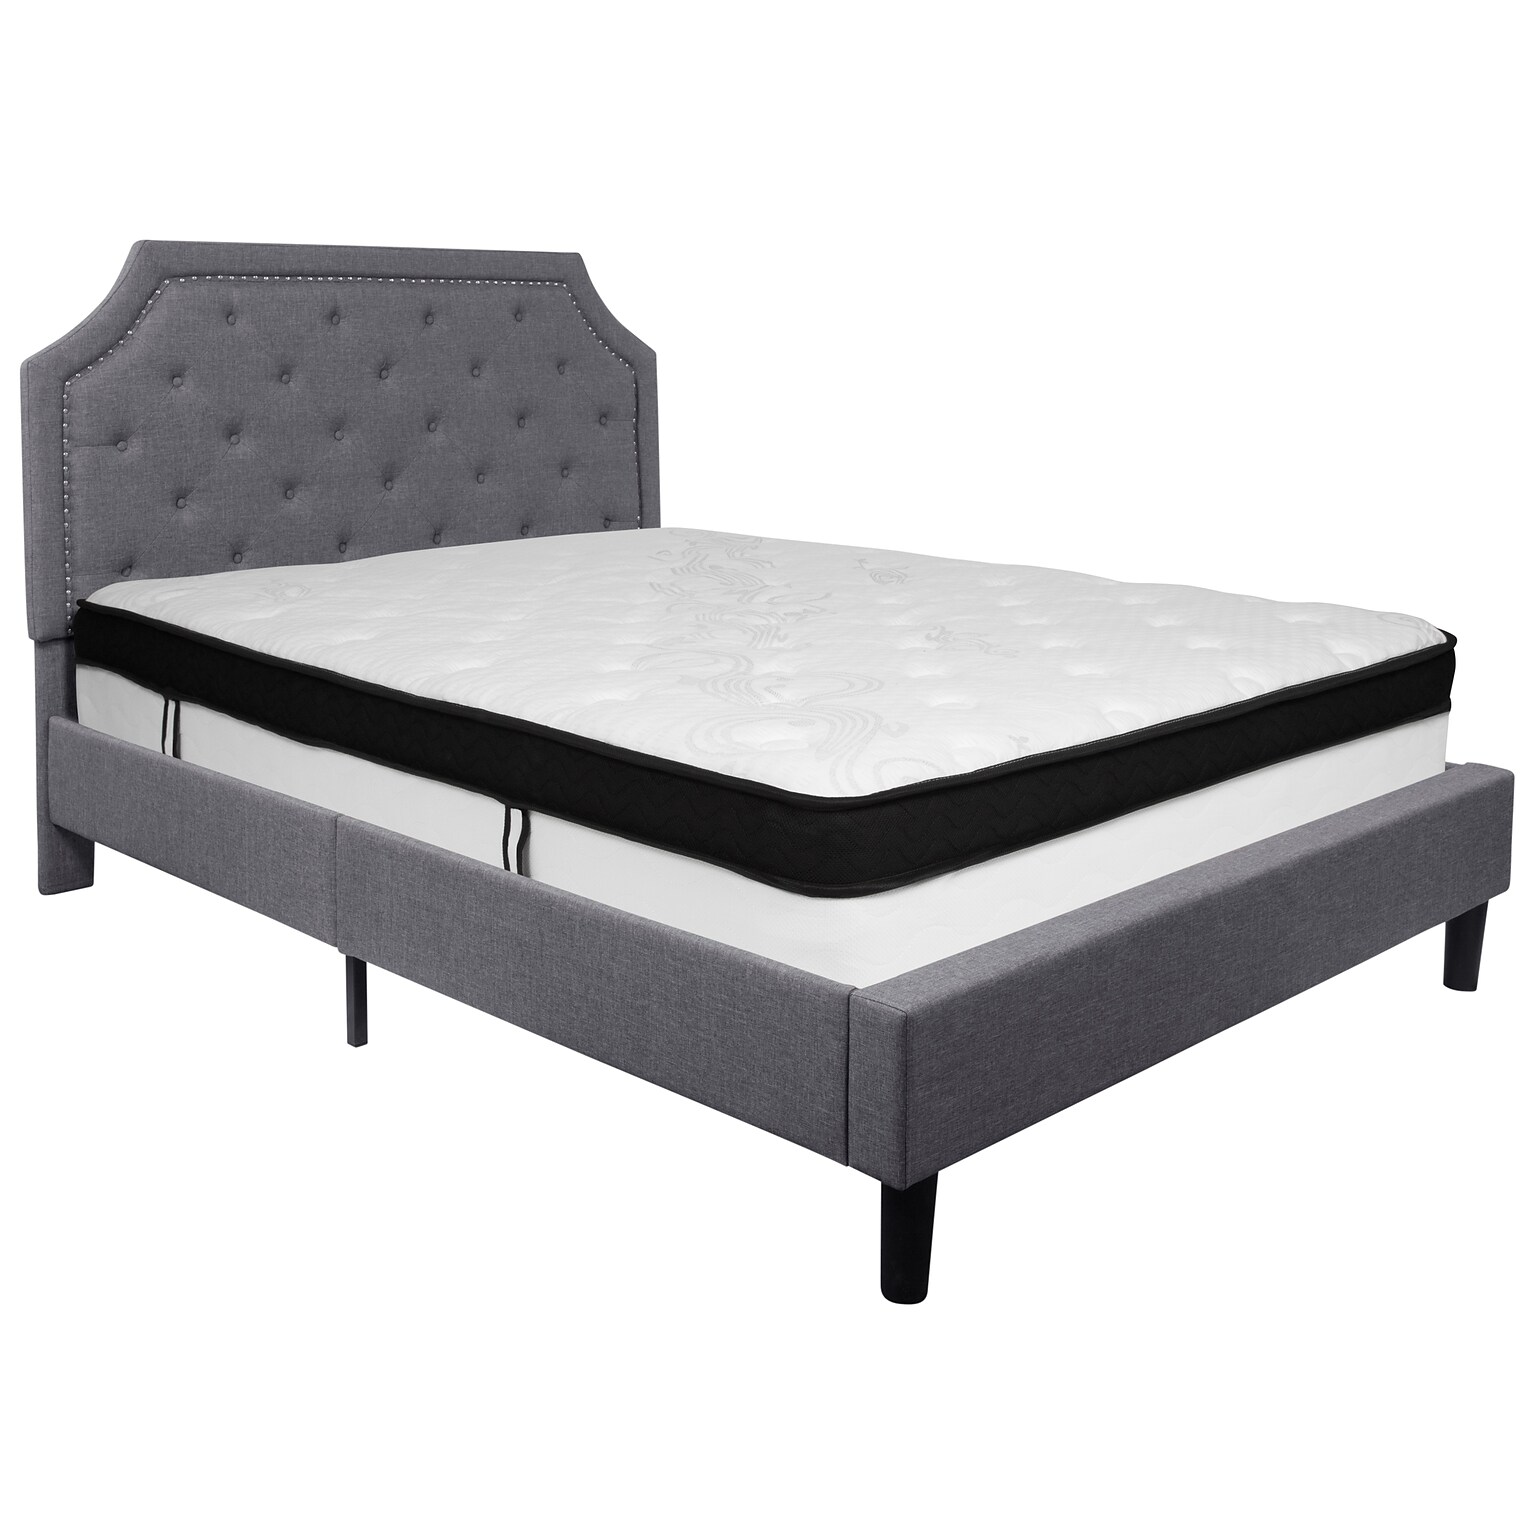 Flash Furniture Brighton Tufted Upholstered Platform Bed in Light Gray Fabric with Memory Foam Mattress, Queen (SLBMF11)